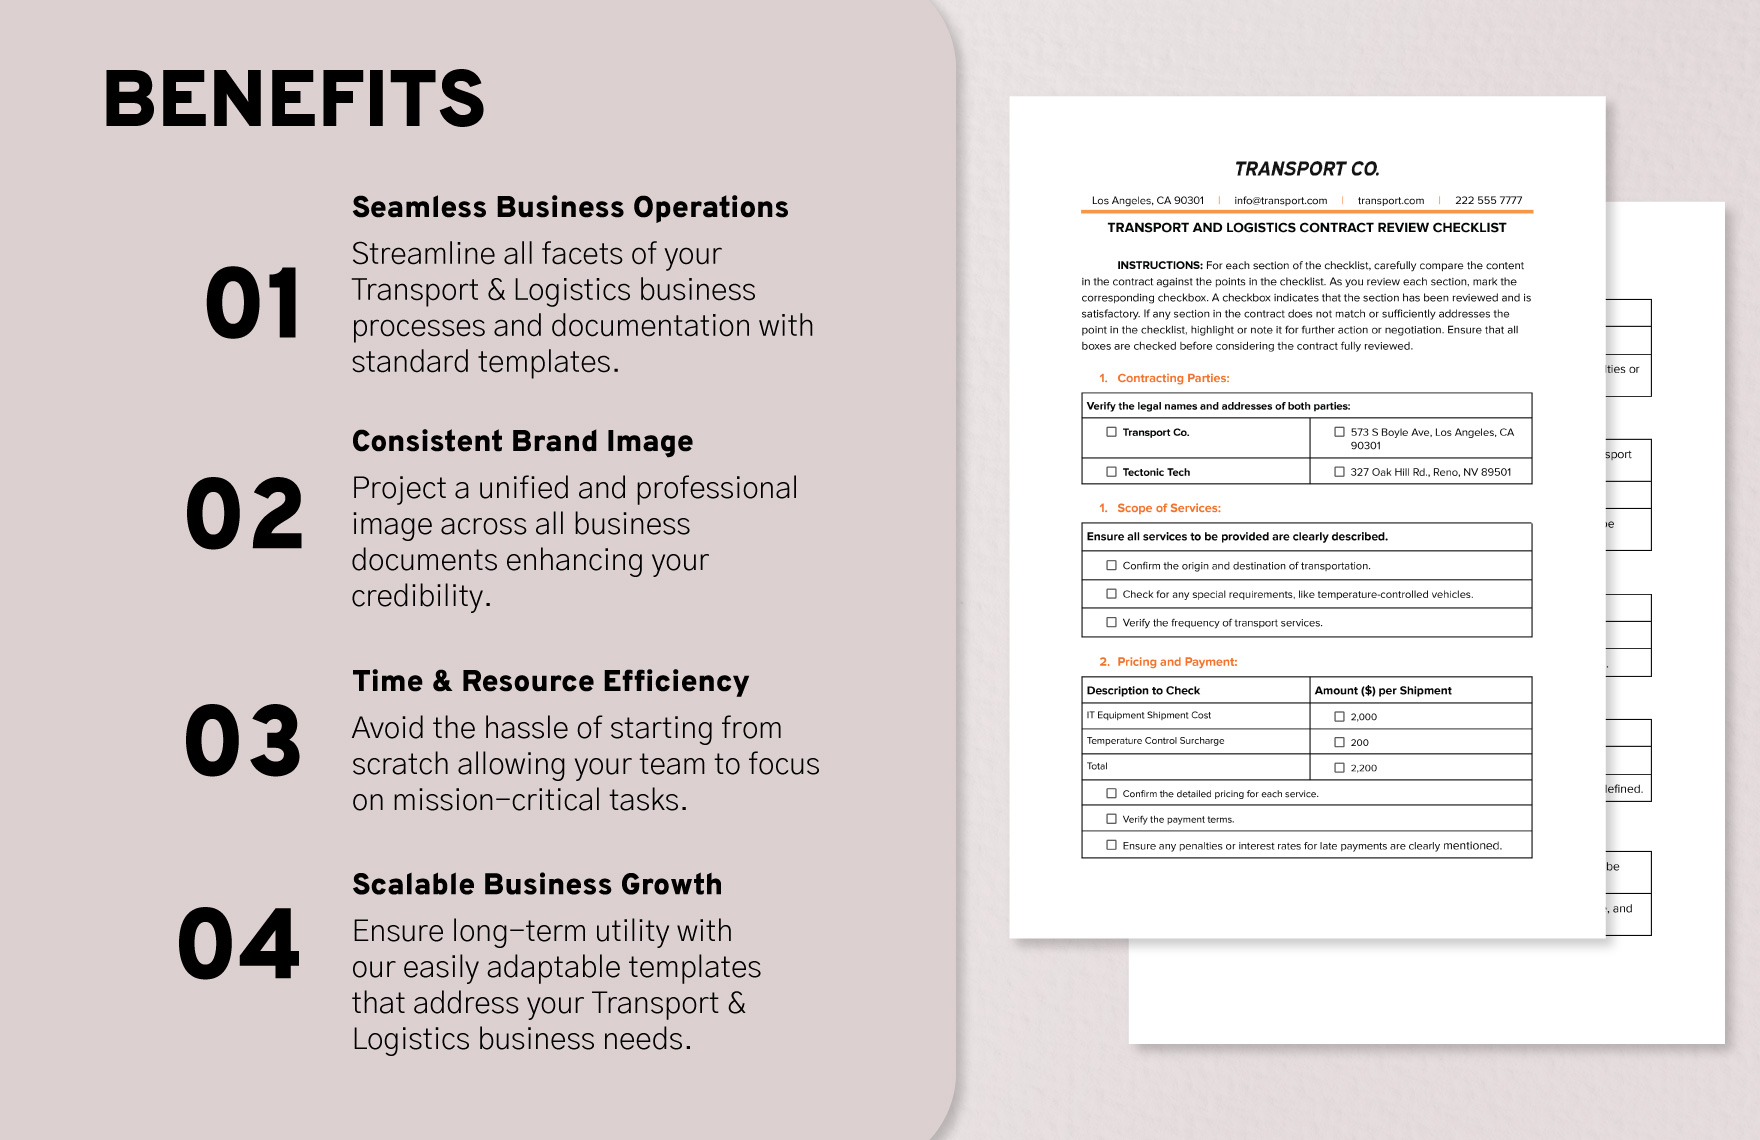 Transport and Logistics Contract Review Checklist Template